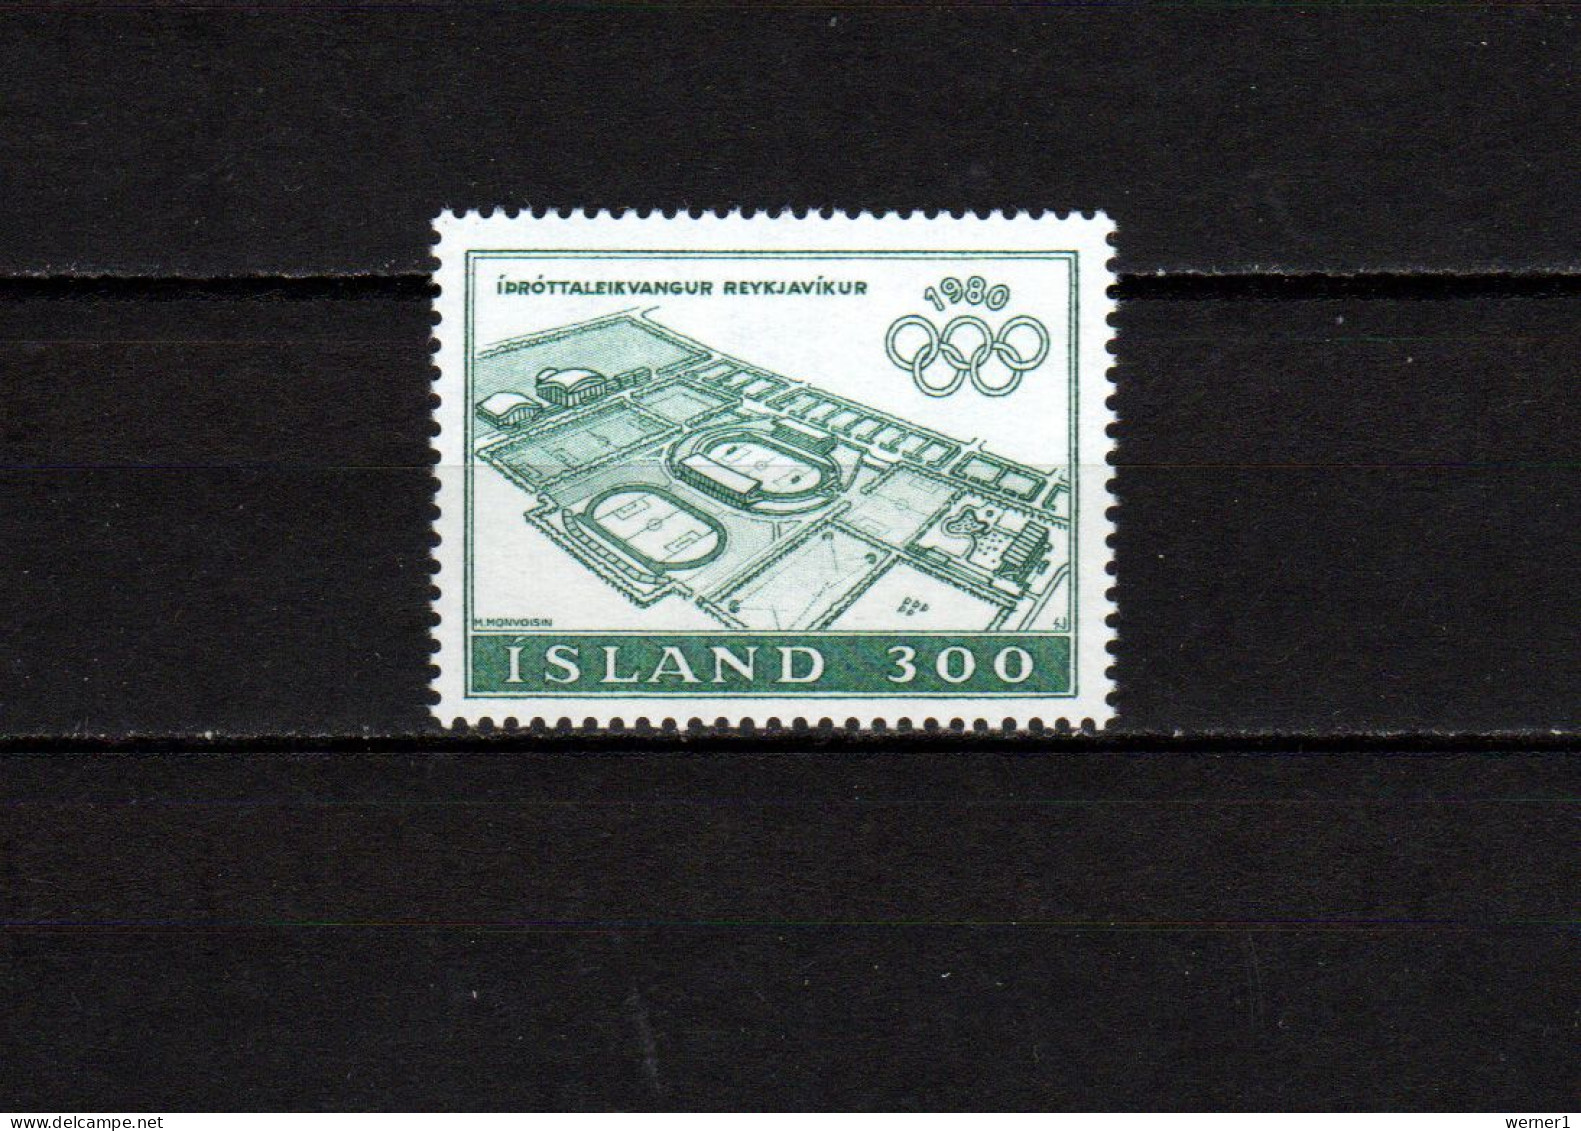 Iceland 1980 Olympic Games Moscow Stamp MNH - Ete 1980: Moscou